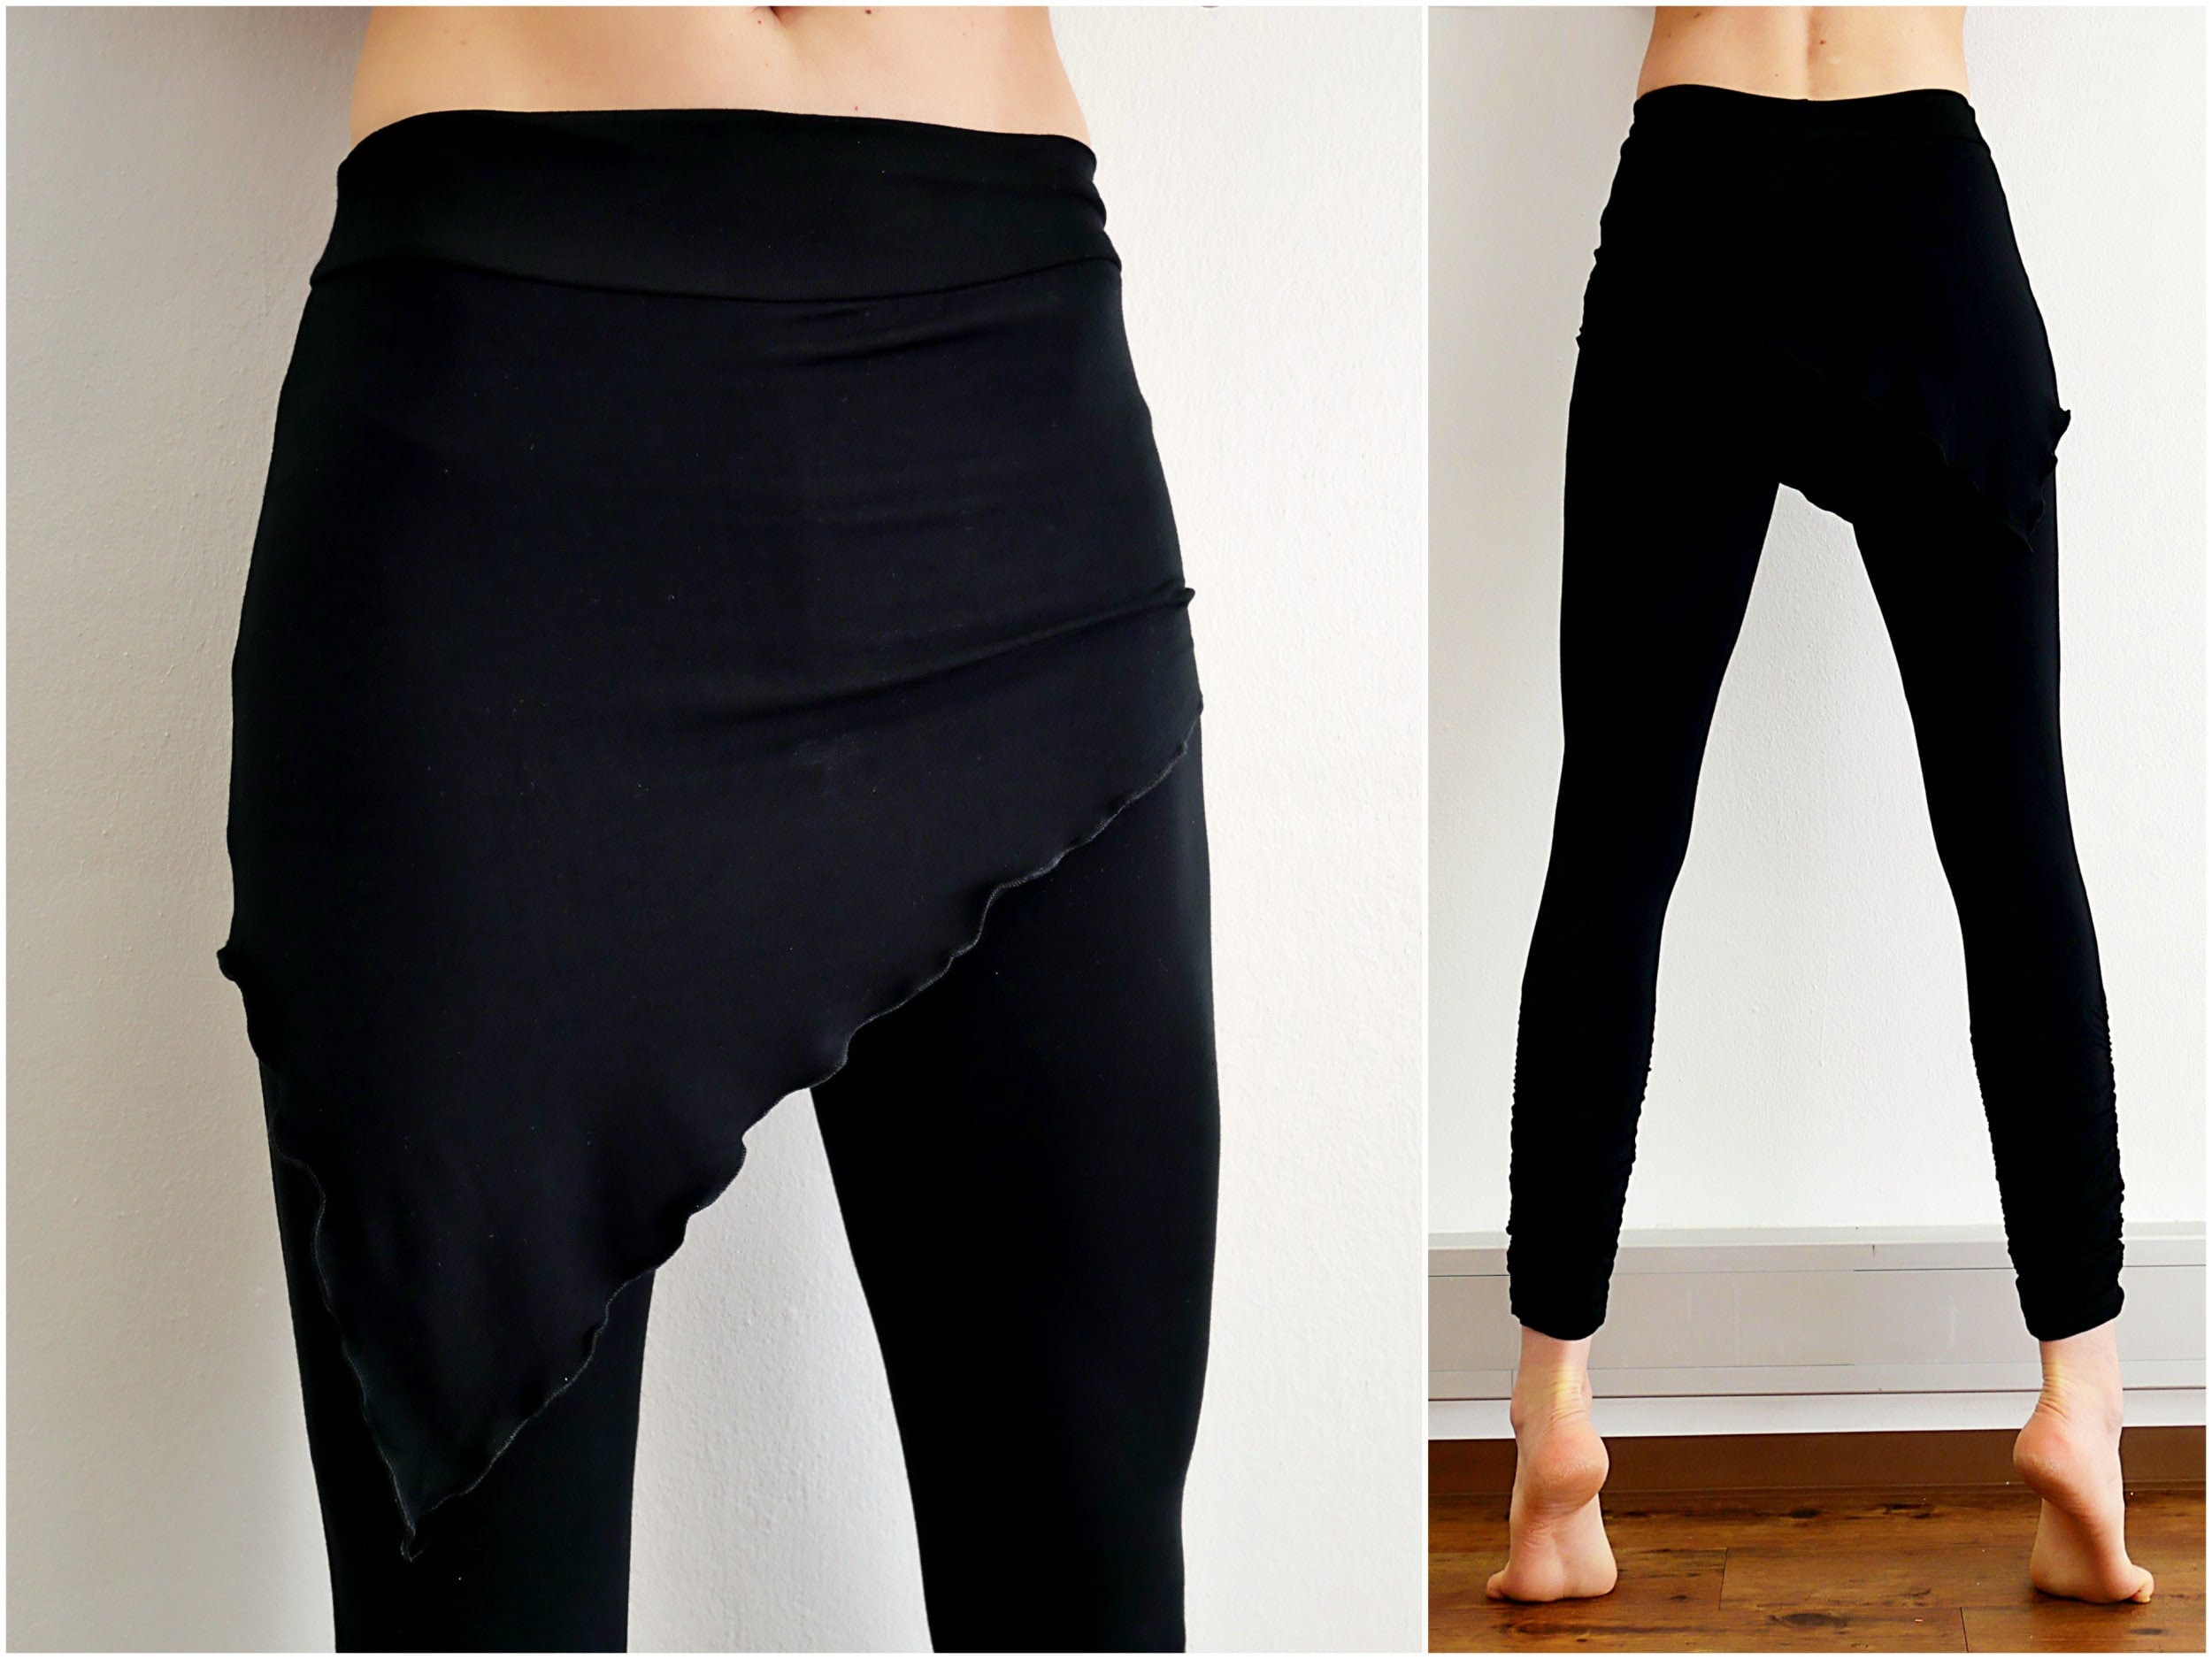 Black Leggings With Skirt, Fitted Stretch Pants, Yoga Pants With